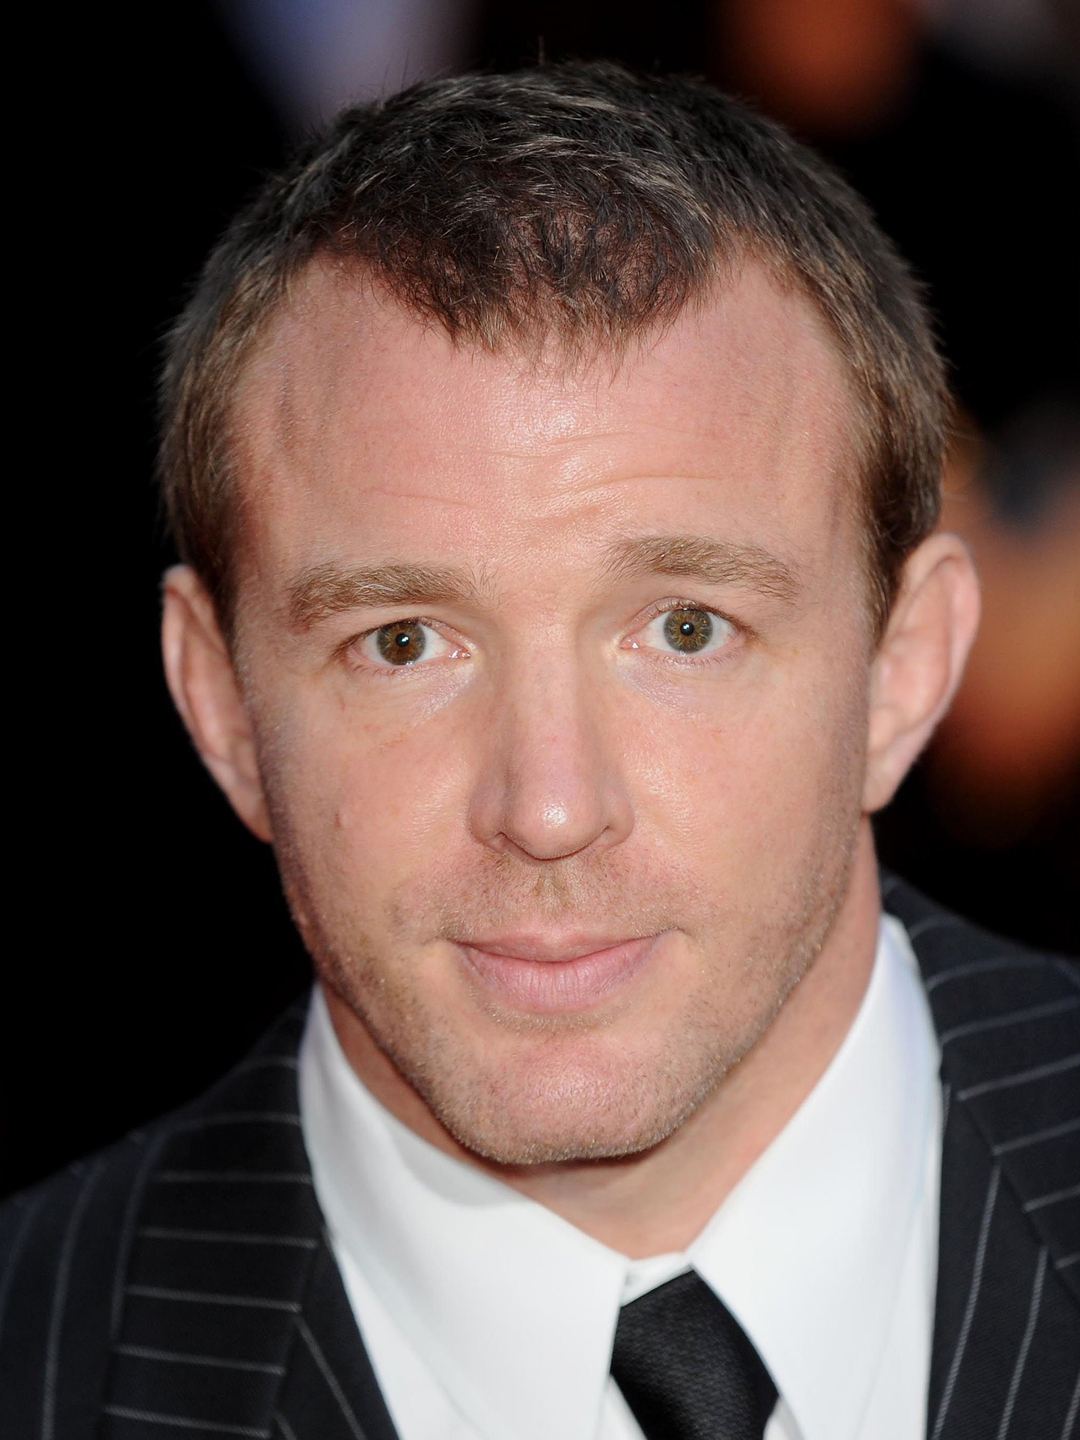 Guy Ritchie in real life